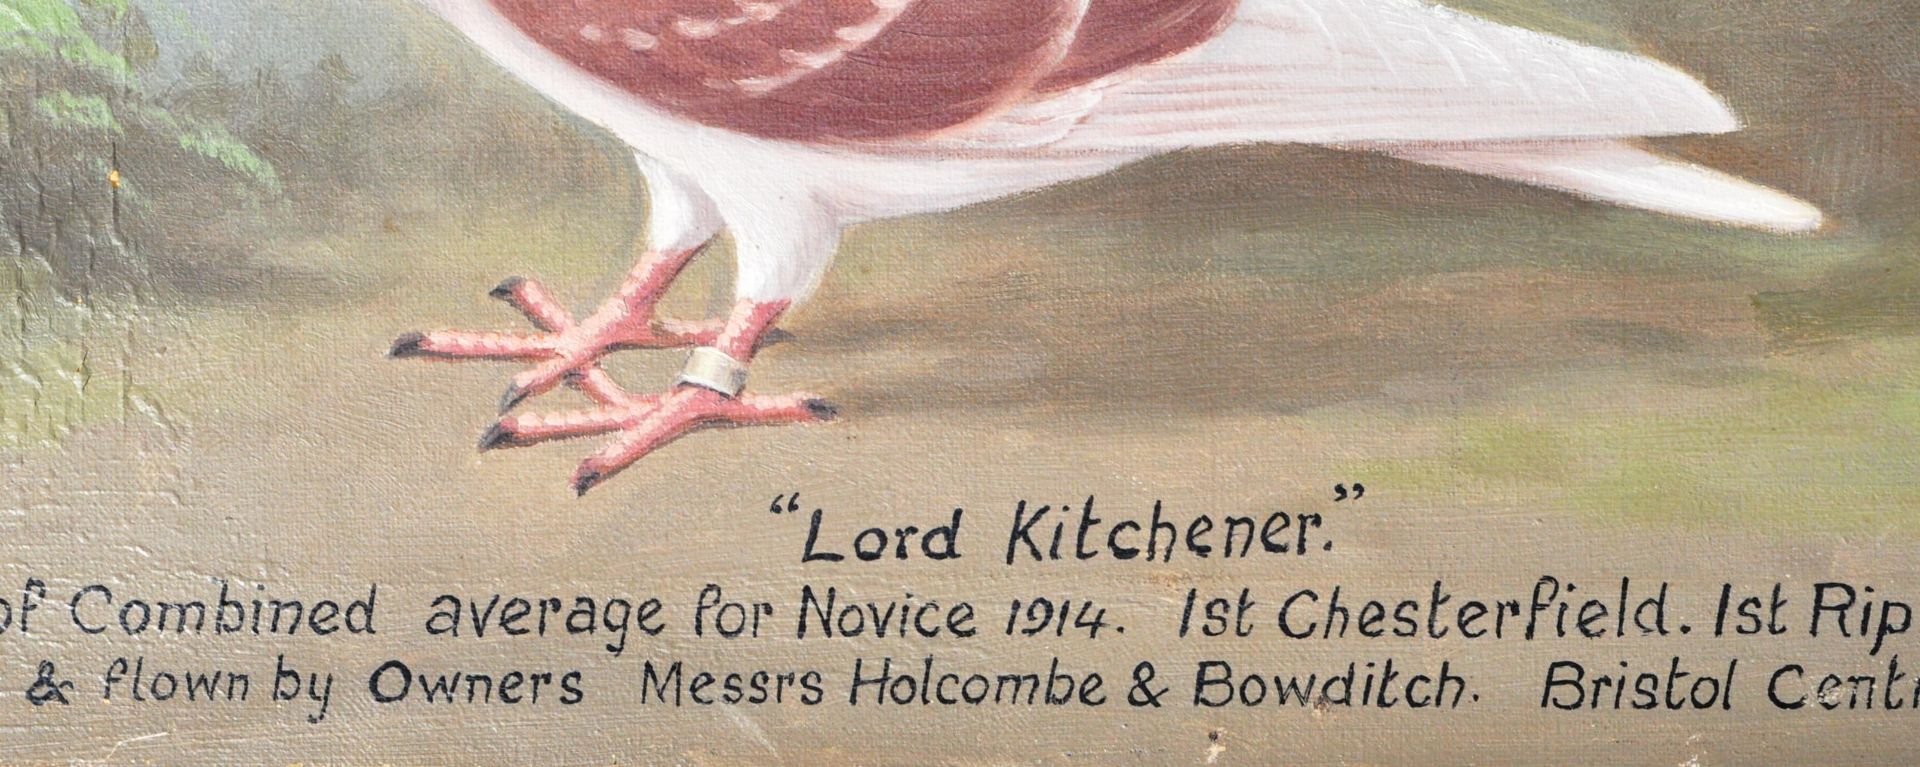 ANDREW BEER - LORD KITCHENER - OIL ON CANVAS RACING PIGEON PAINTING - Image 8 of 11